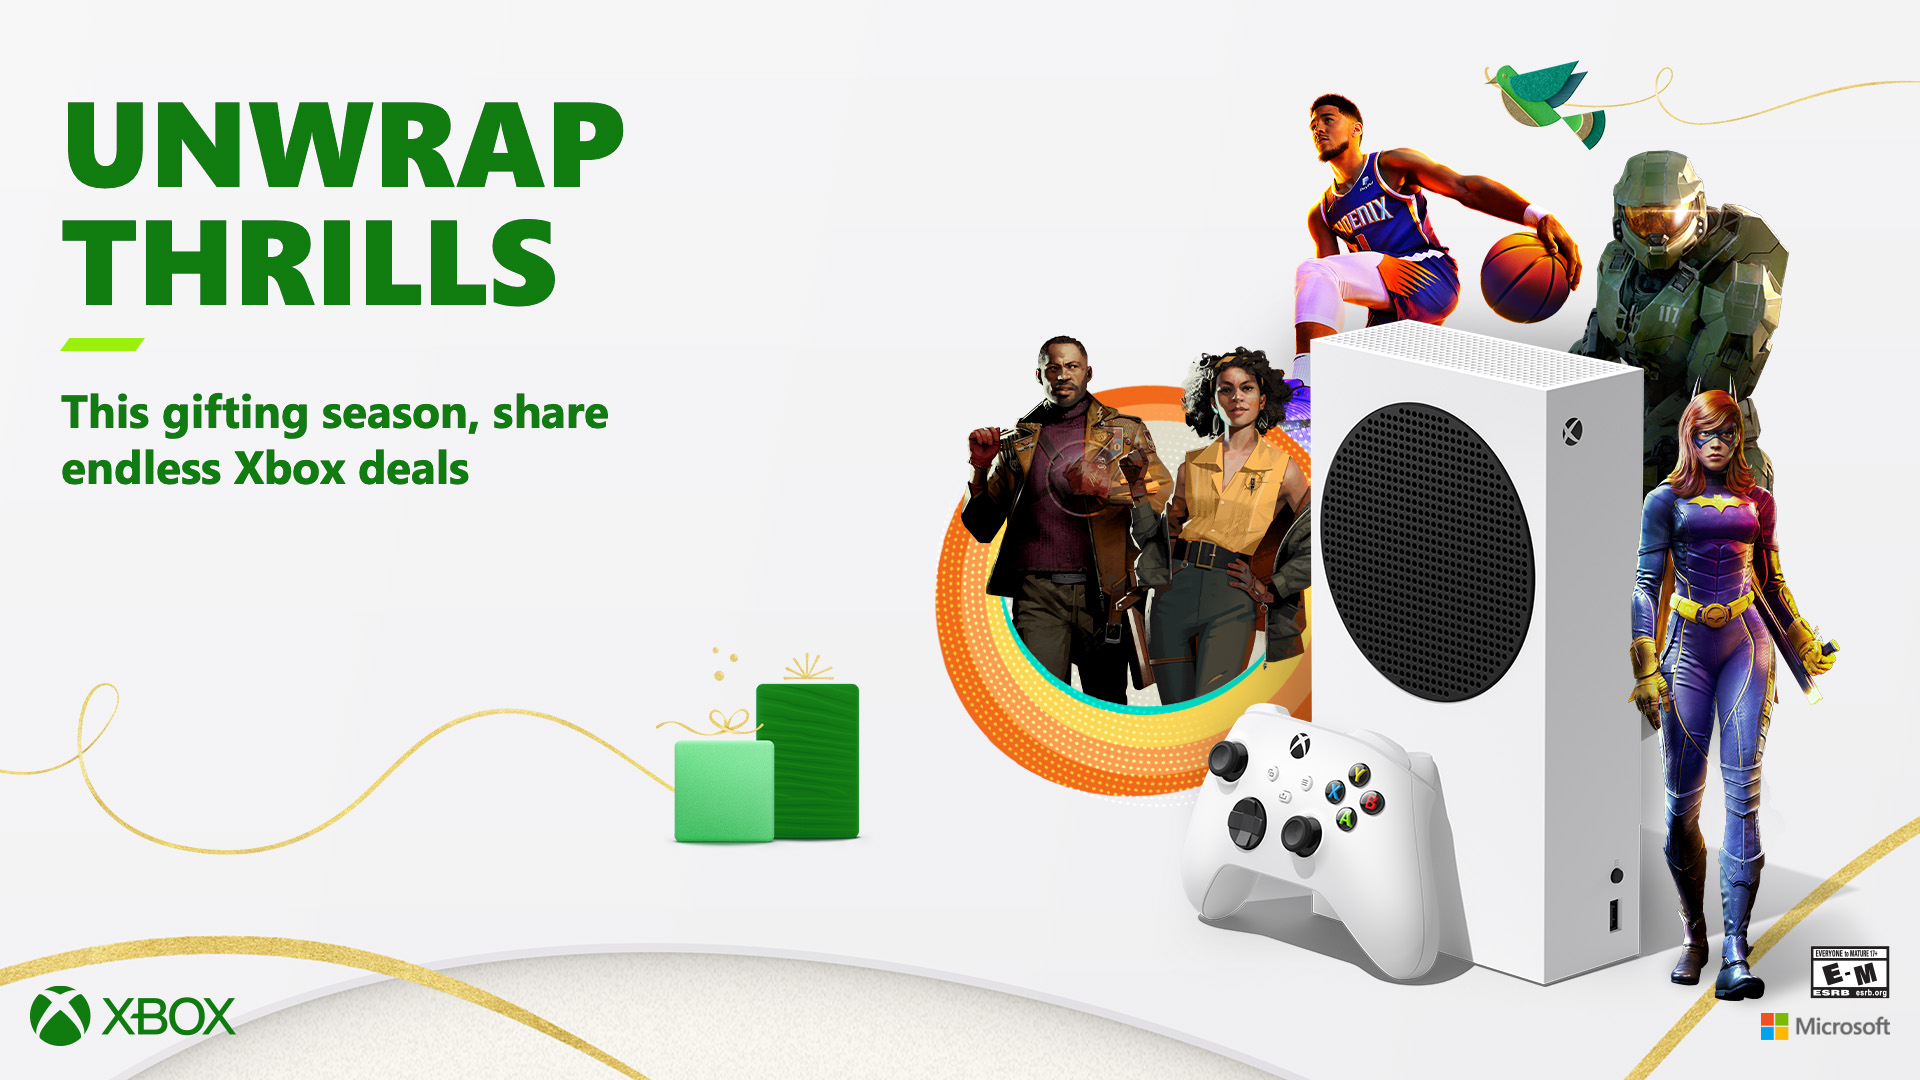 Friday: Thrills with $50 off Xbox S, 900+ Games on Sale, and More! - Xbox Wire